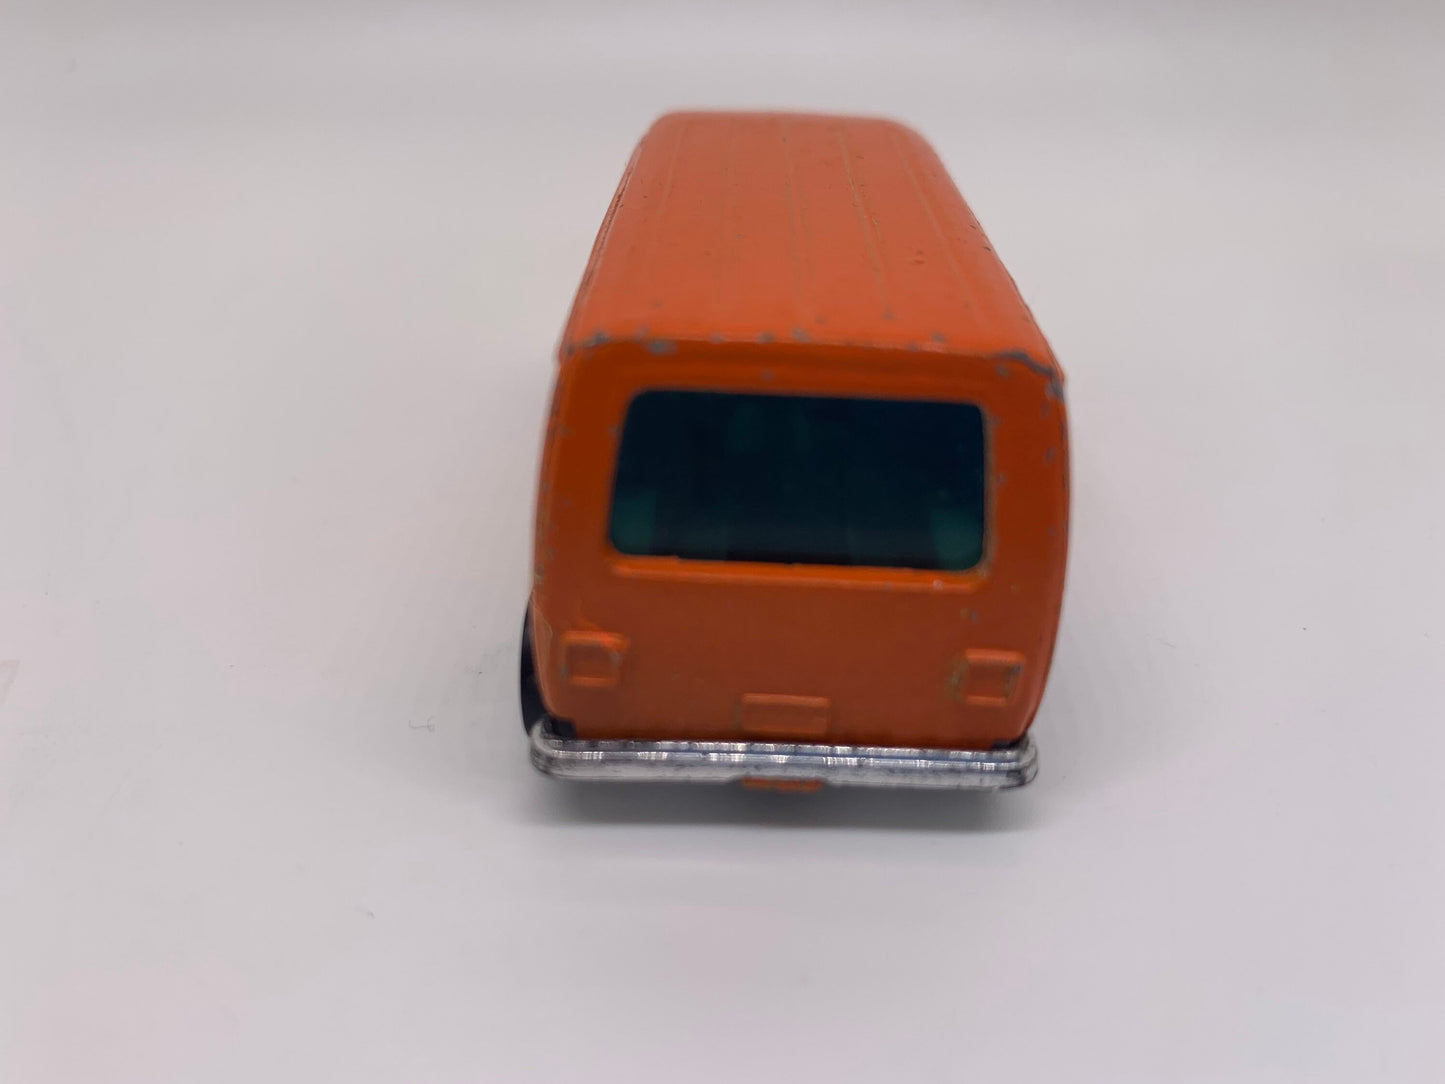 Hot Wheels GMC Motorhome Orange Mainline Collectable Scale Miniature Model Toy Car Perfect Birthday Gift